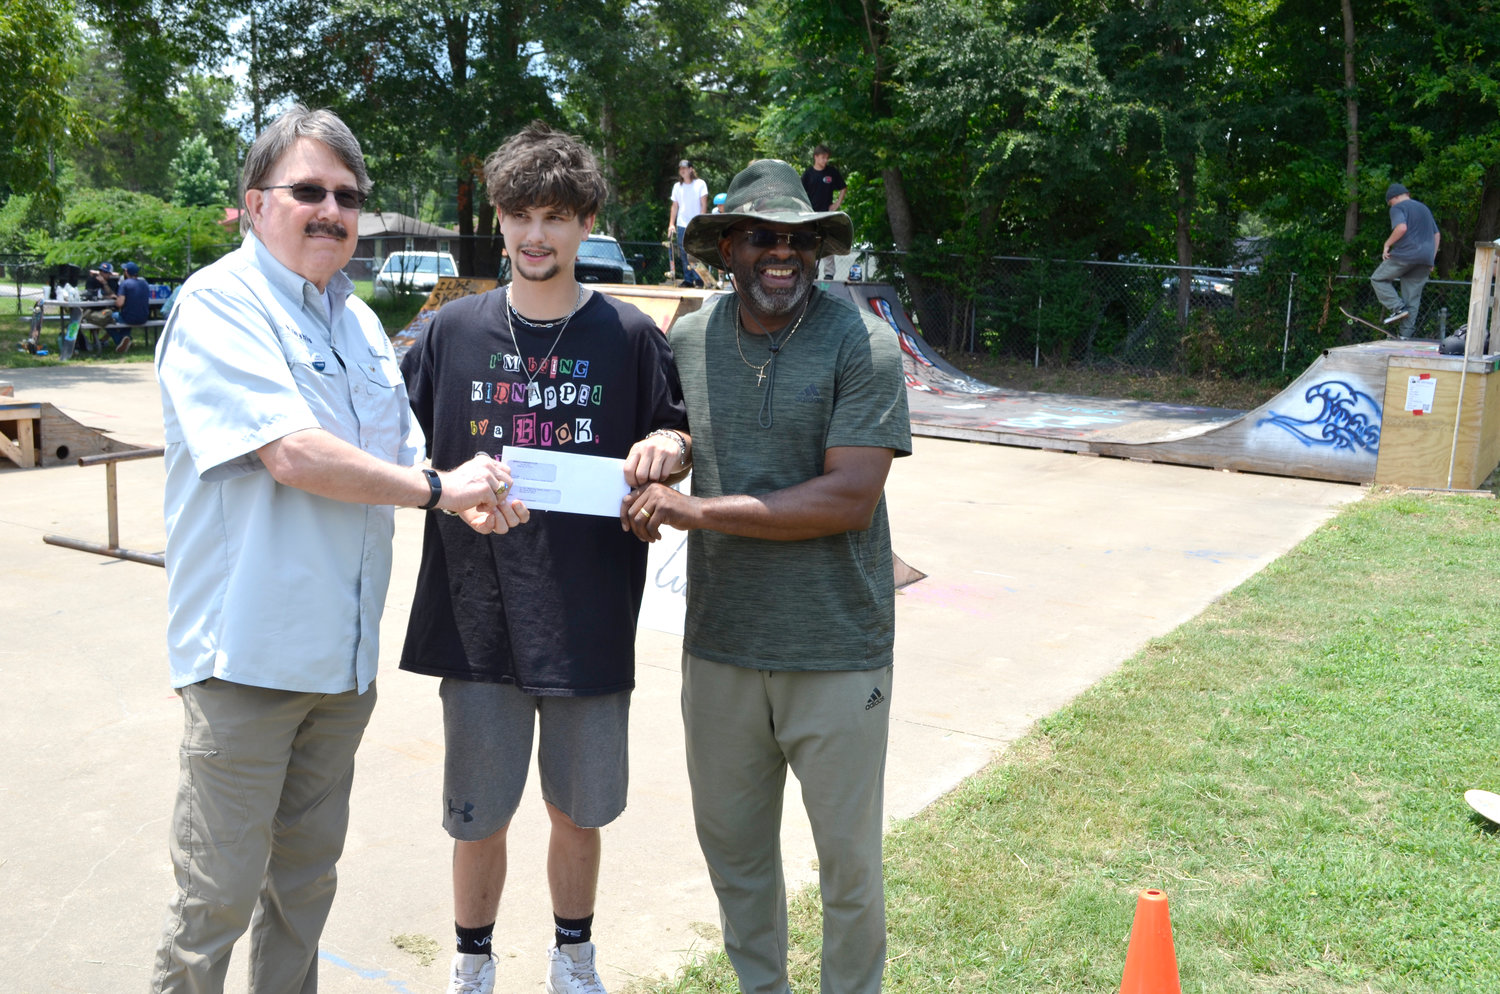 Roy Shockey, left, president of the Mineola Kiwanis Club, presents a check for $500 to Nathan Witt with the Flint and Steel Coalition, center, and Demethrius Boyd, pastor of St. Paul Missionary Baptist Church for use to improve the St. Paul Community Skate park during last week’s skate day competition.